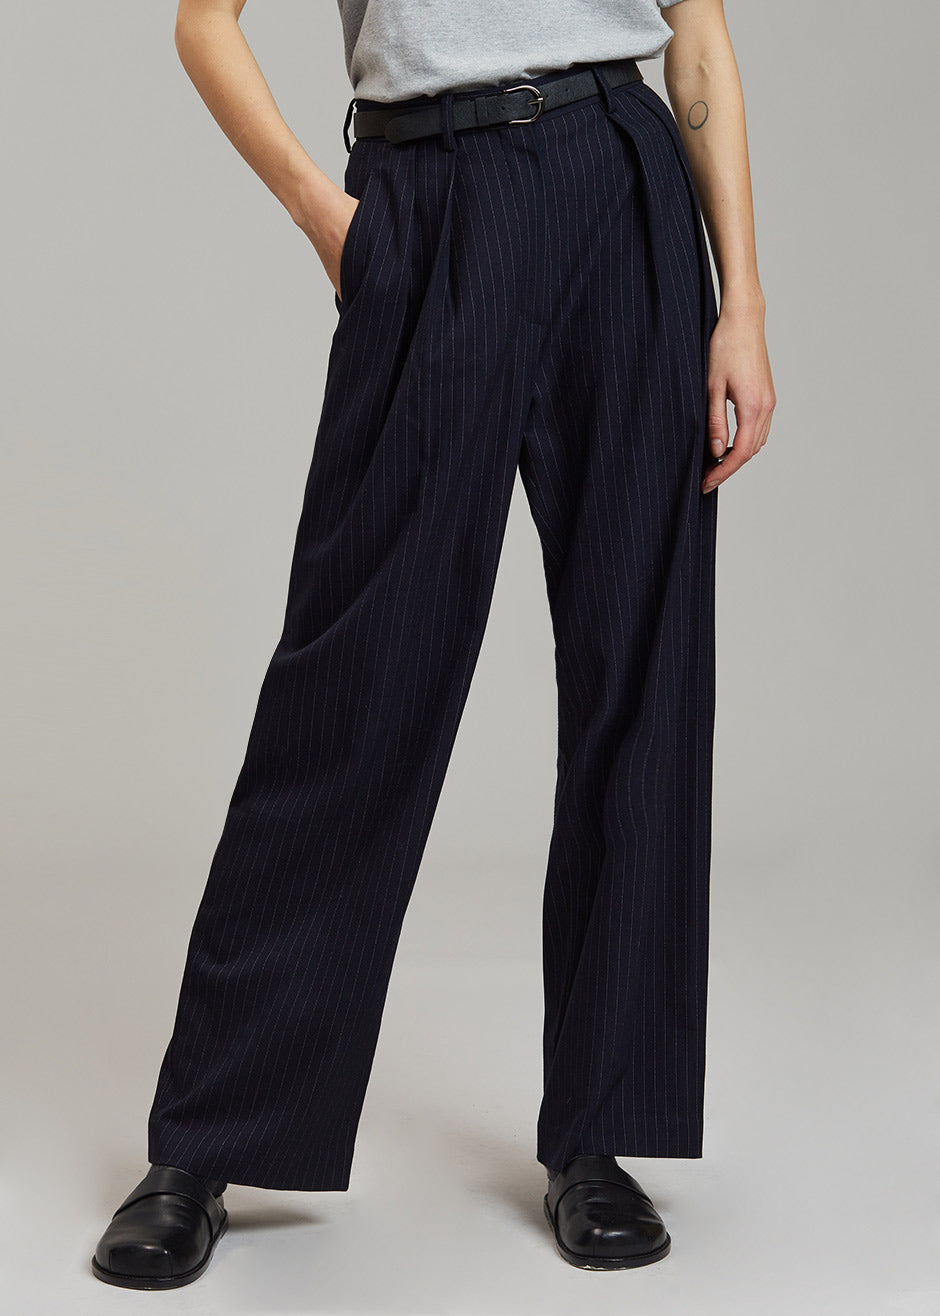 Buy DEAL JEANS Womens 2 Pocket Striped Pants | Shoppers Stop